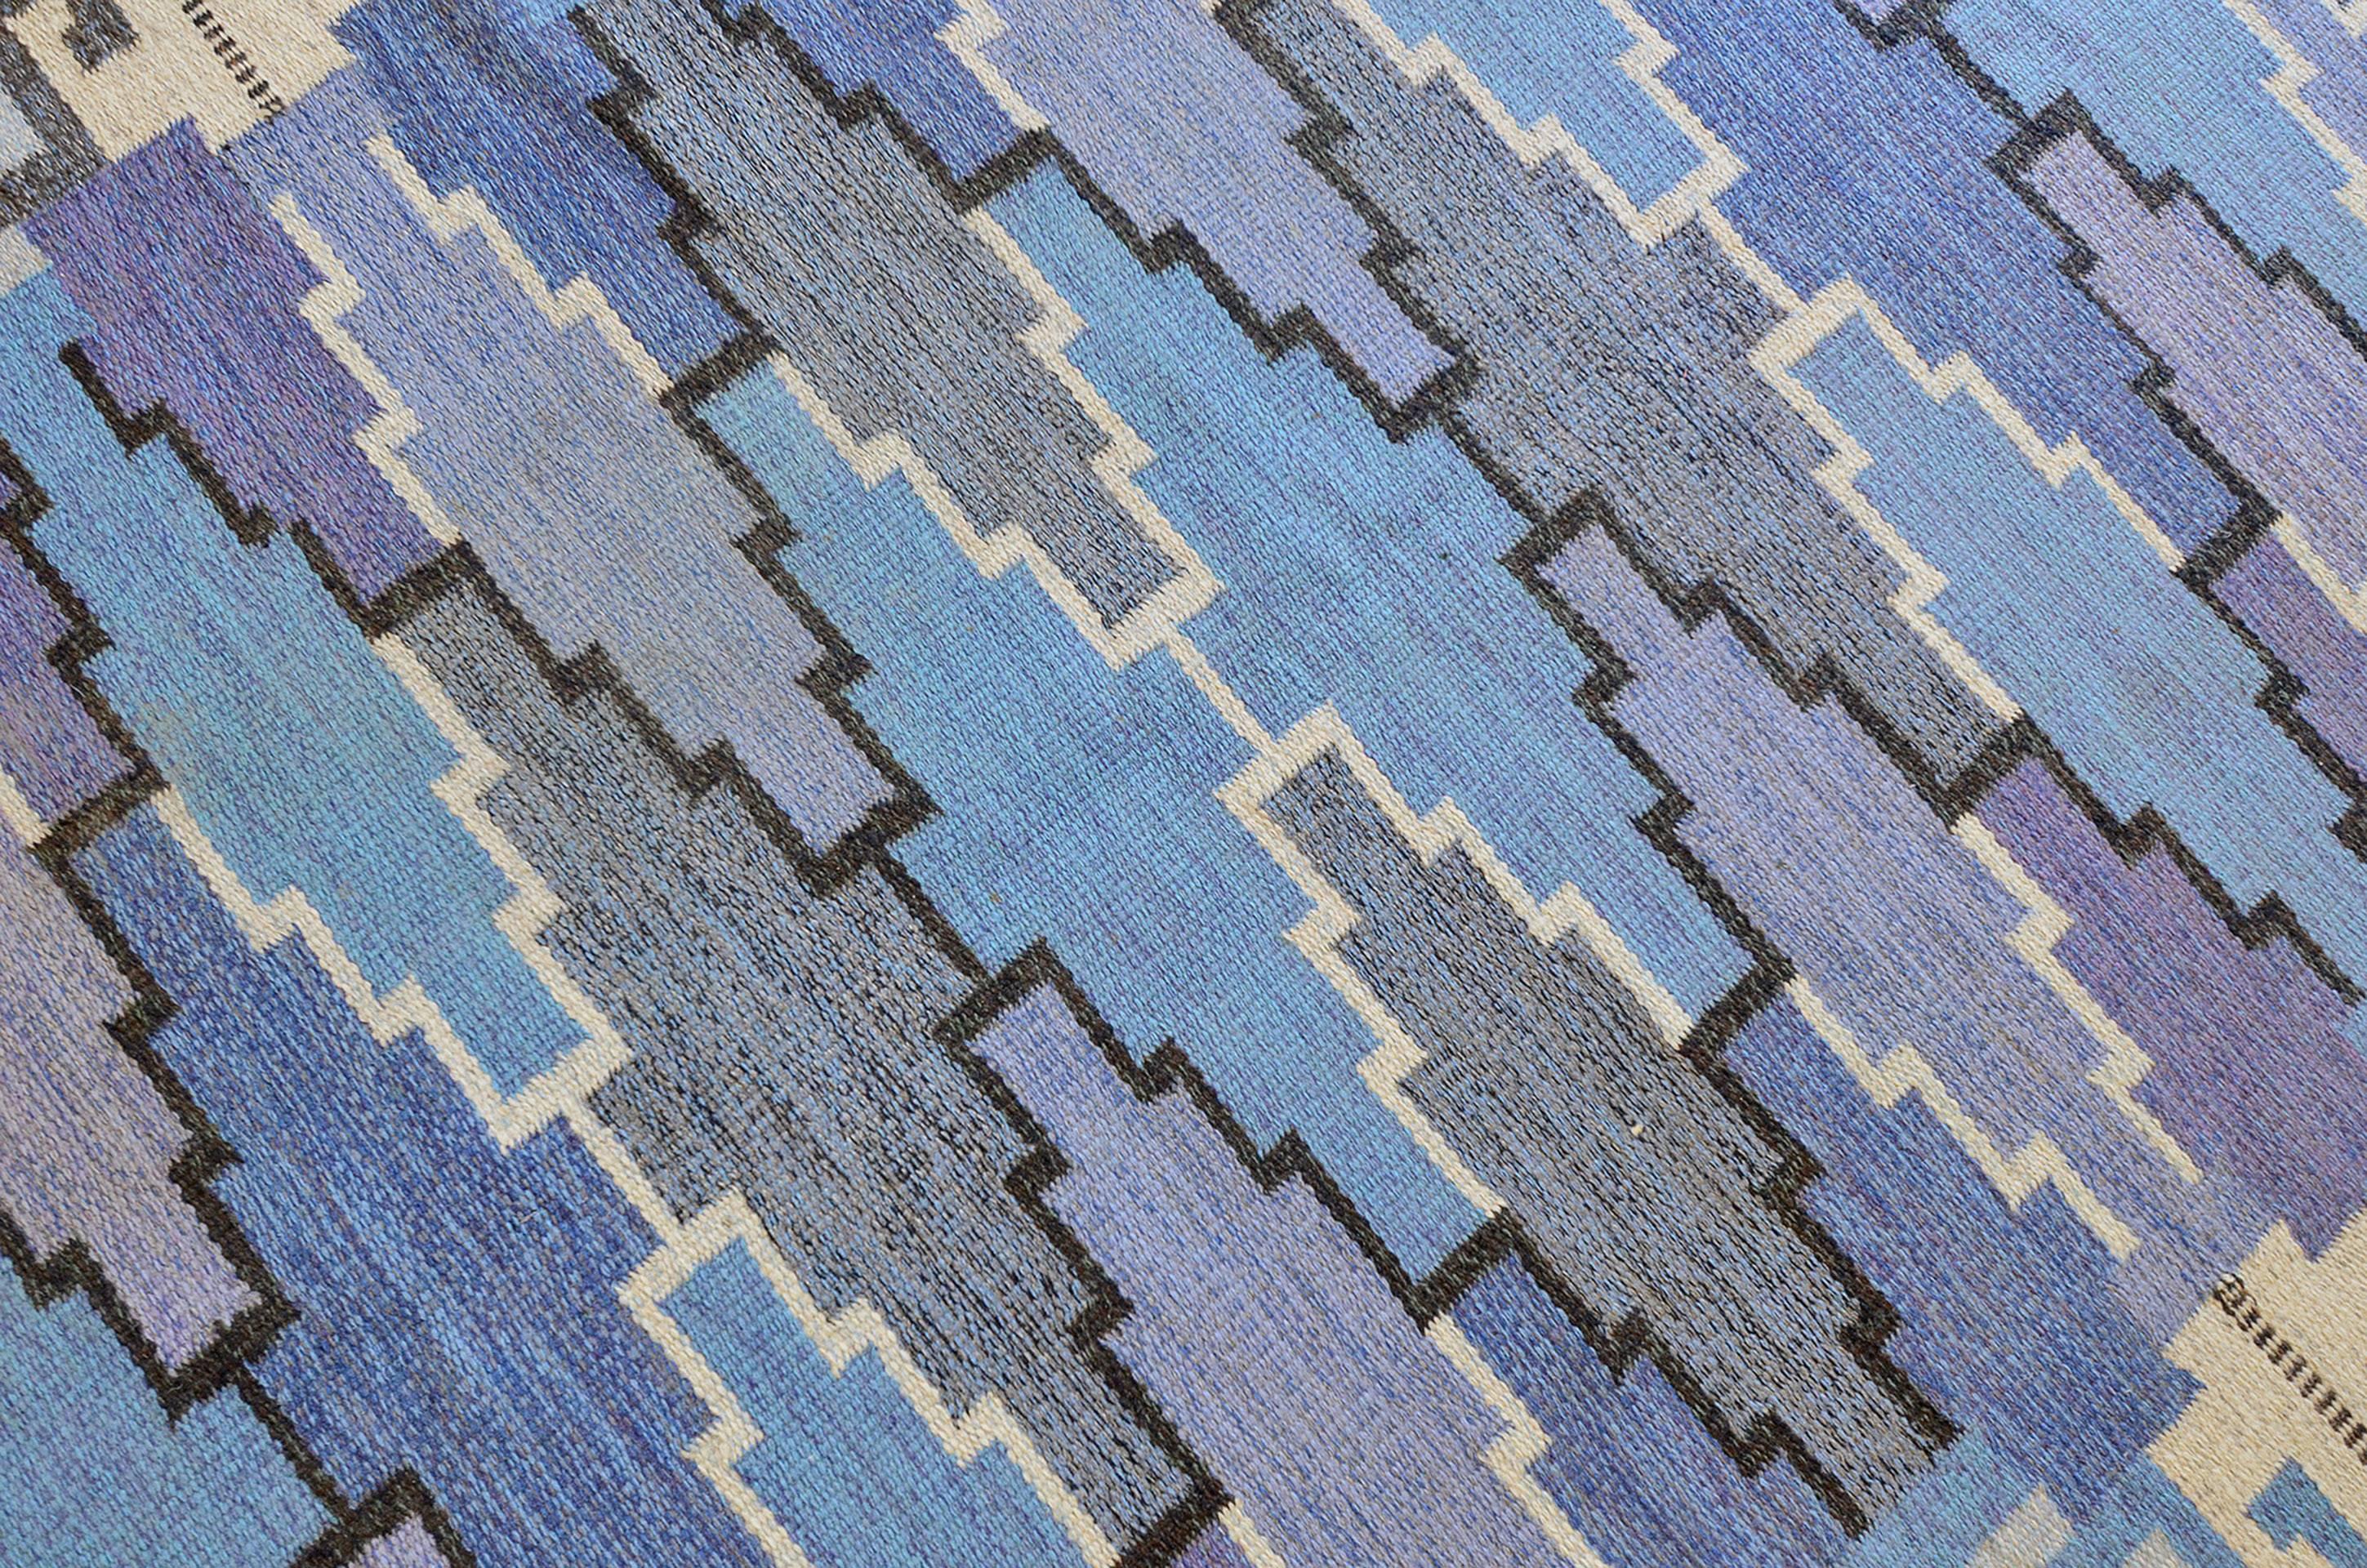 Mid-Century Modern Mid-20th Century Swedish Rug Signed by Ingegerd Silow For Sale